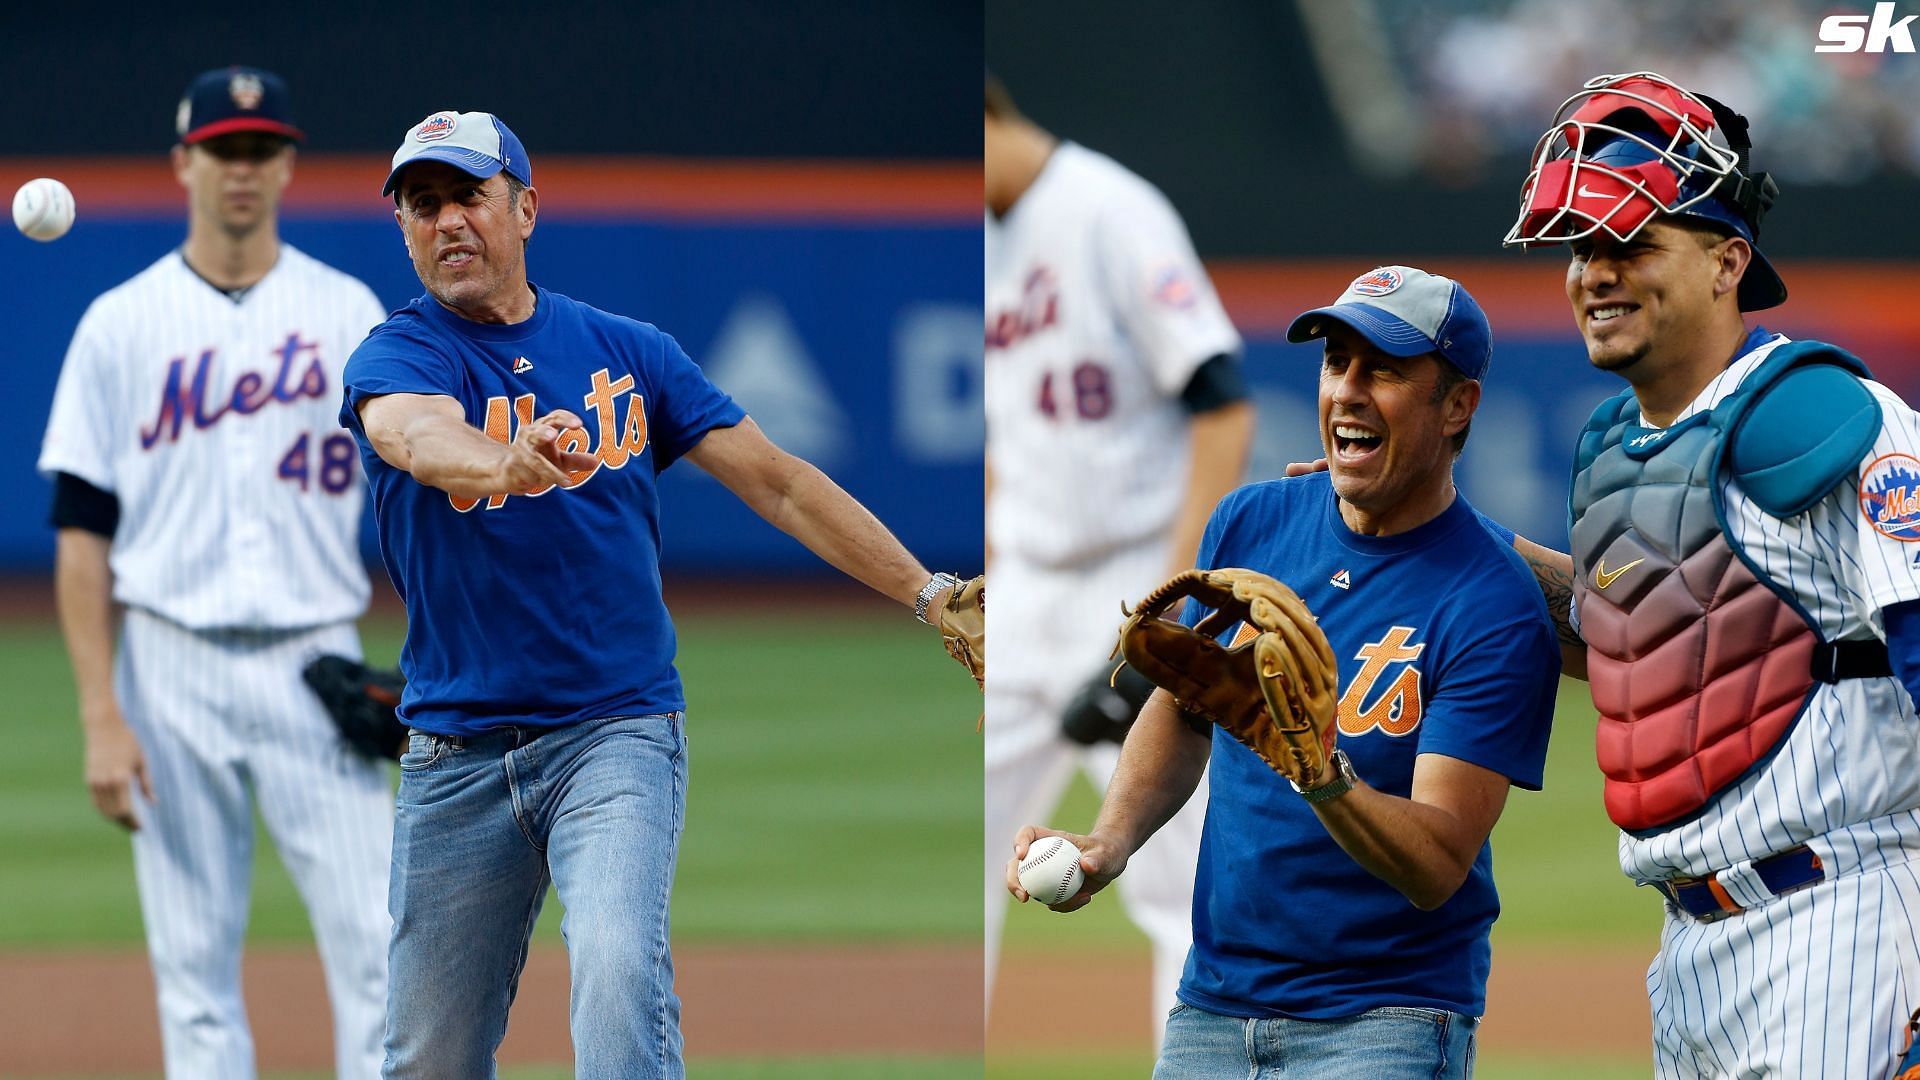 Comedian Jerry Seinfeld poses for a photograph with Wilson Ramos of the New York Mets after throwing out the ceremonial first pitch before a game against the Philadelphia Phillies at Citi Field